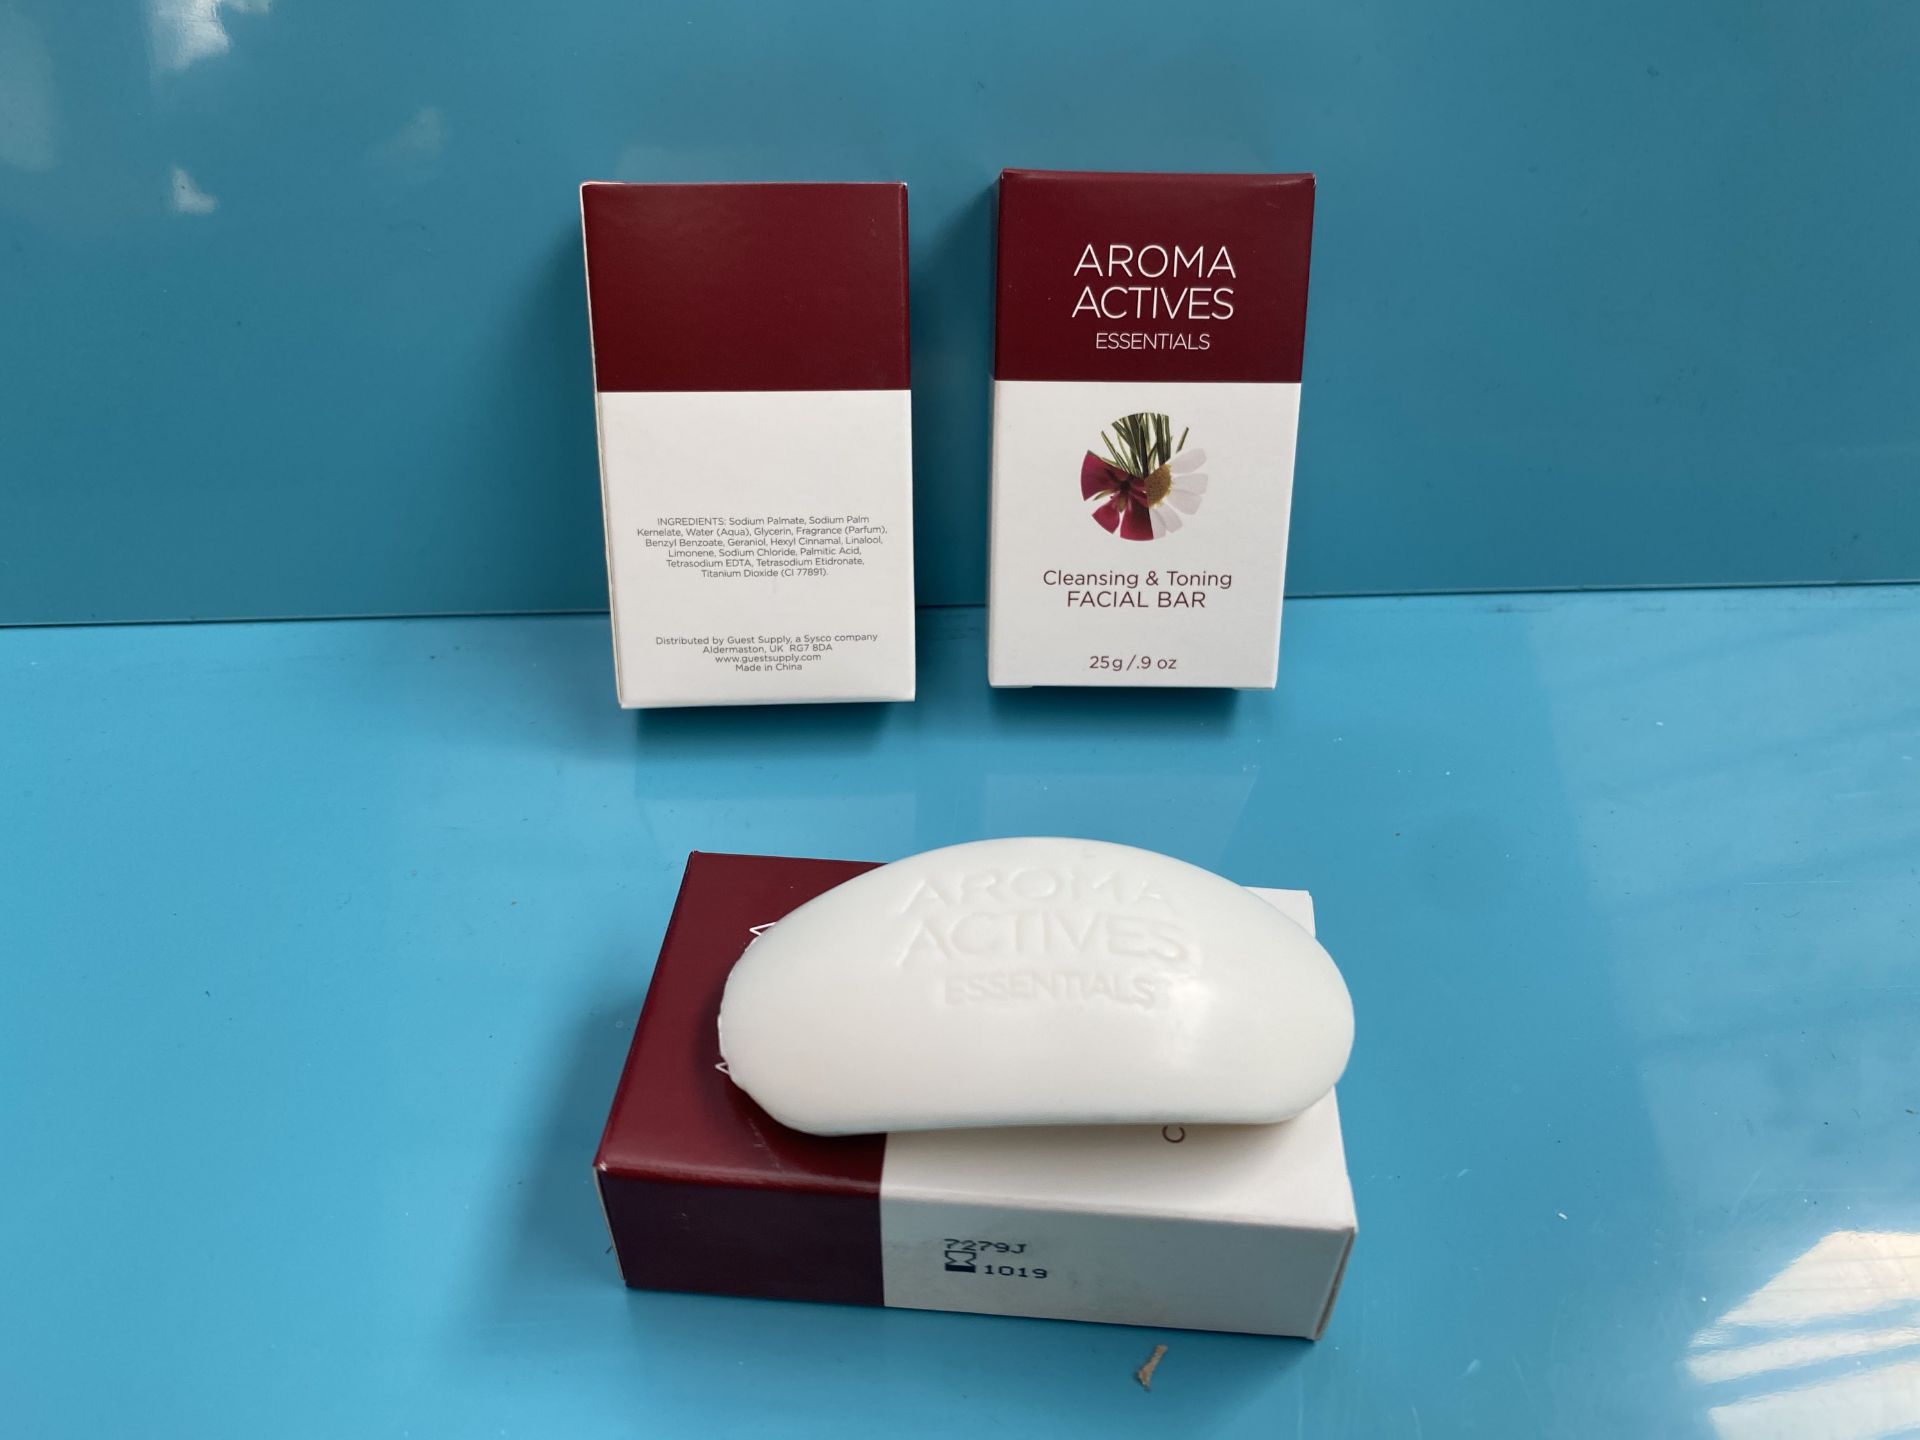 200 x AROMA ACTIVES ESSENTIALS 25g cleansing & toning facial bar